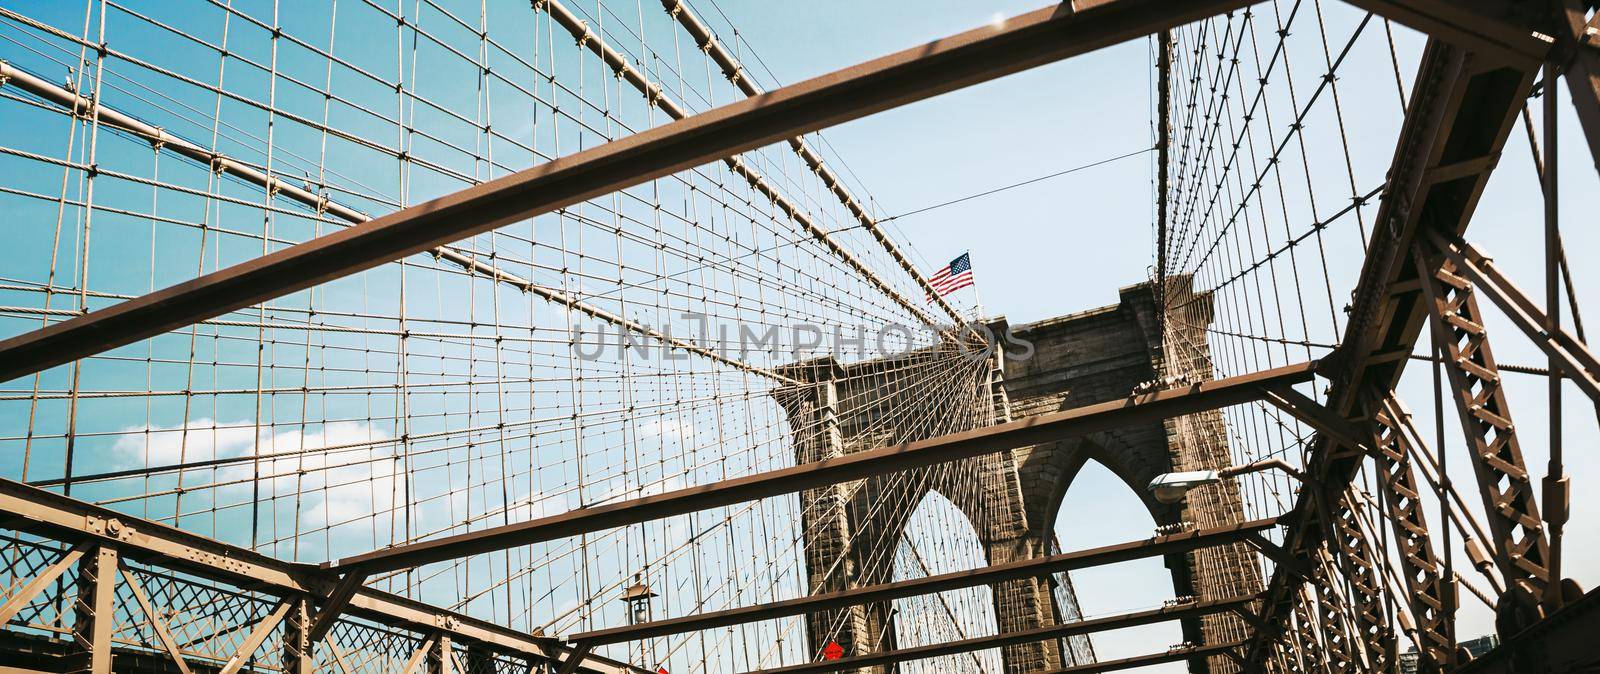 Brooklyn Bridge is a hybrid cable-stayed suspension bridge in New York City and is one of the oldest bridges of either type in the United States